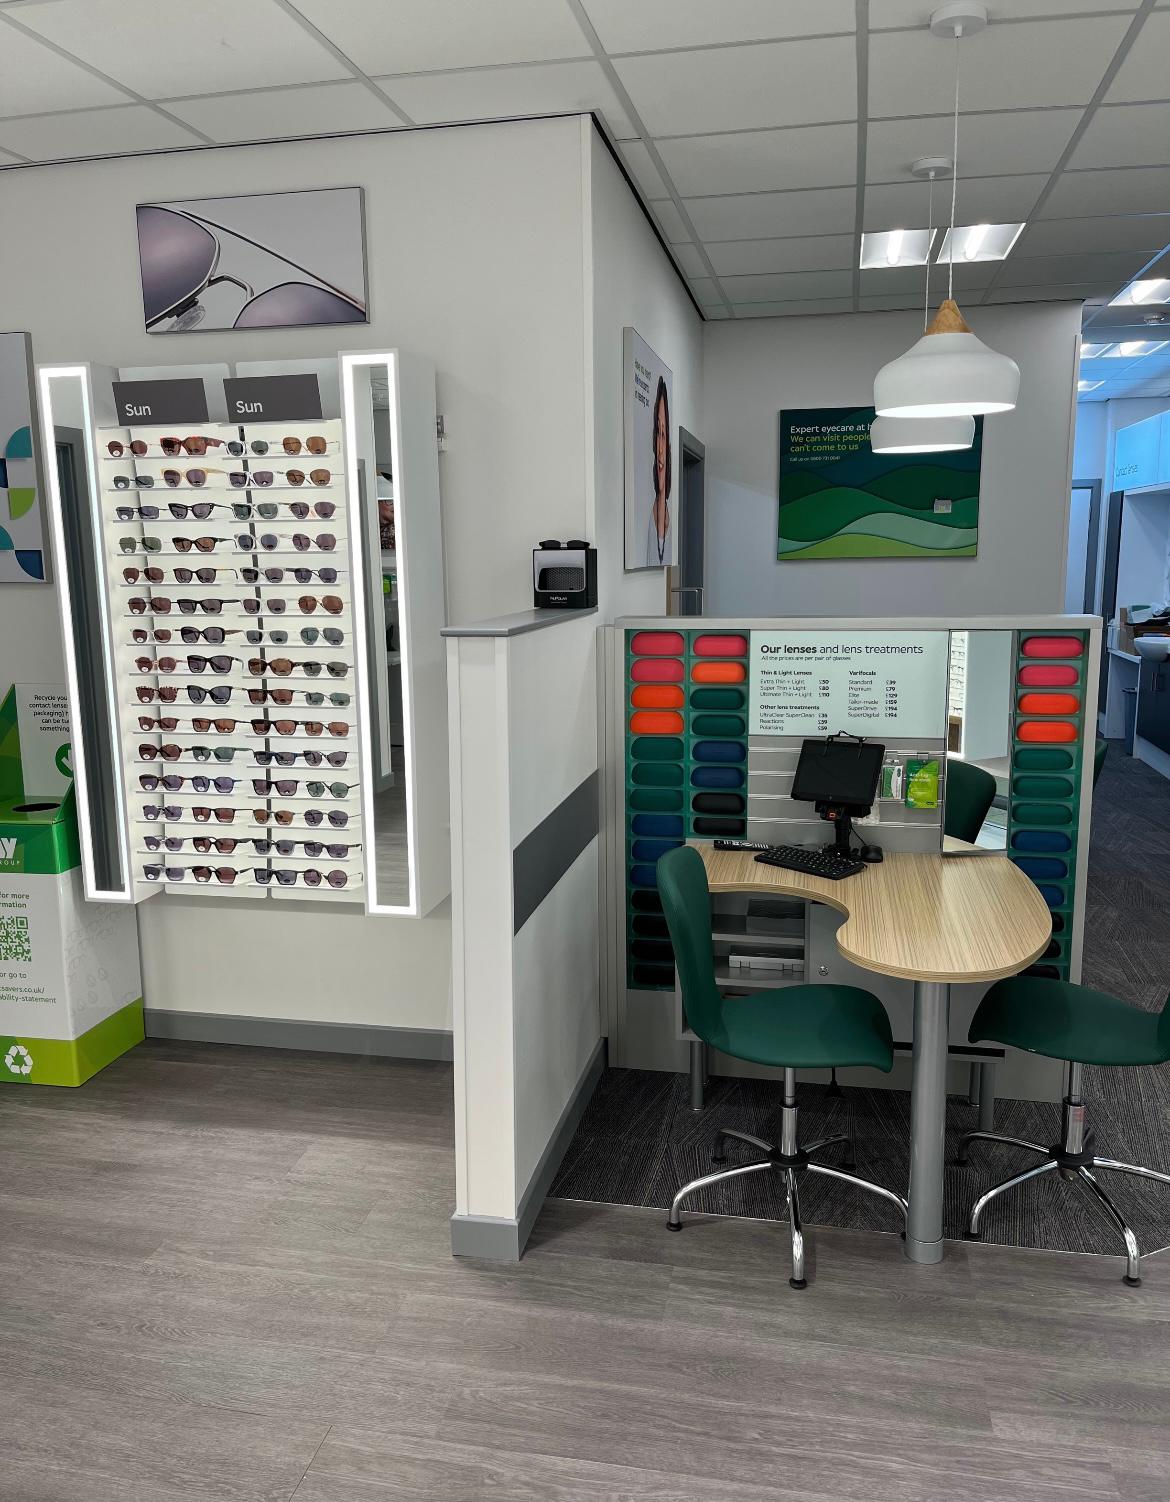 Images Specsavers Opticians and Audiologists - St Albans